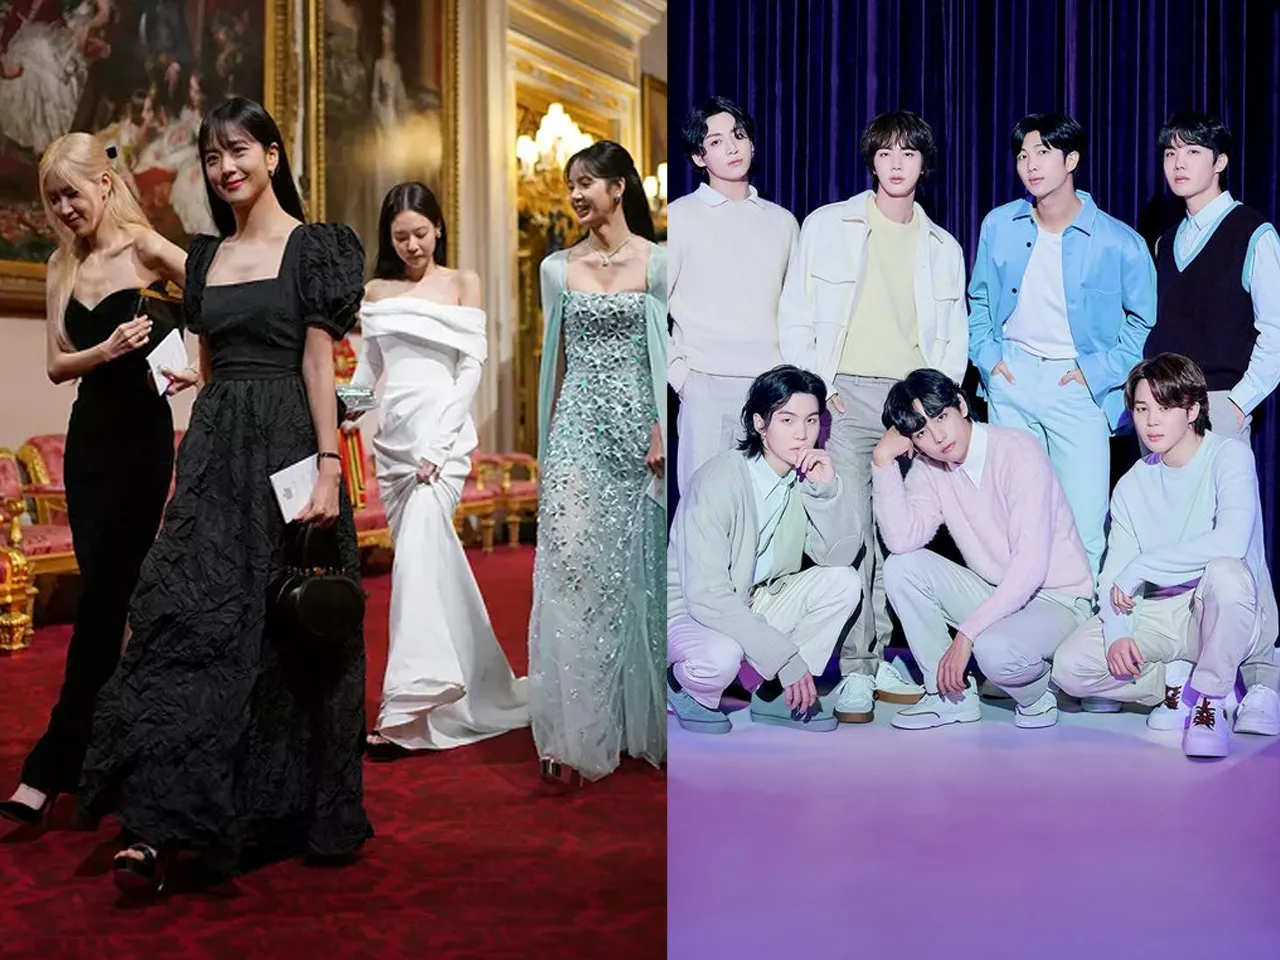 From Blackpink being honored at Buckingham Palace to BTS’ new documentary, we have it all in our E Round up!